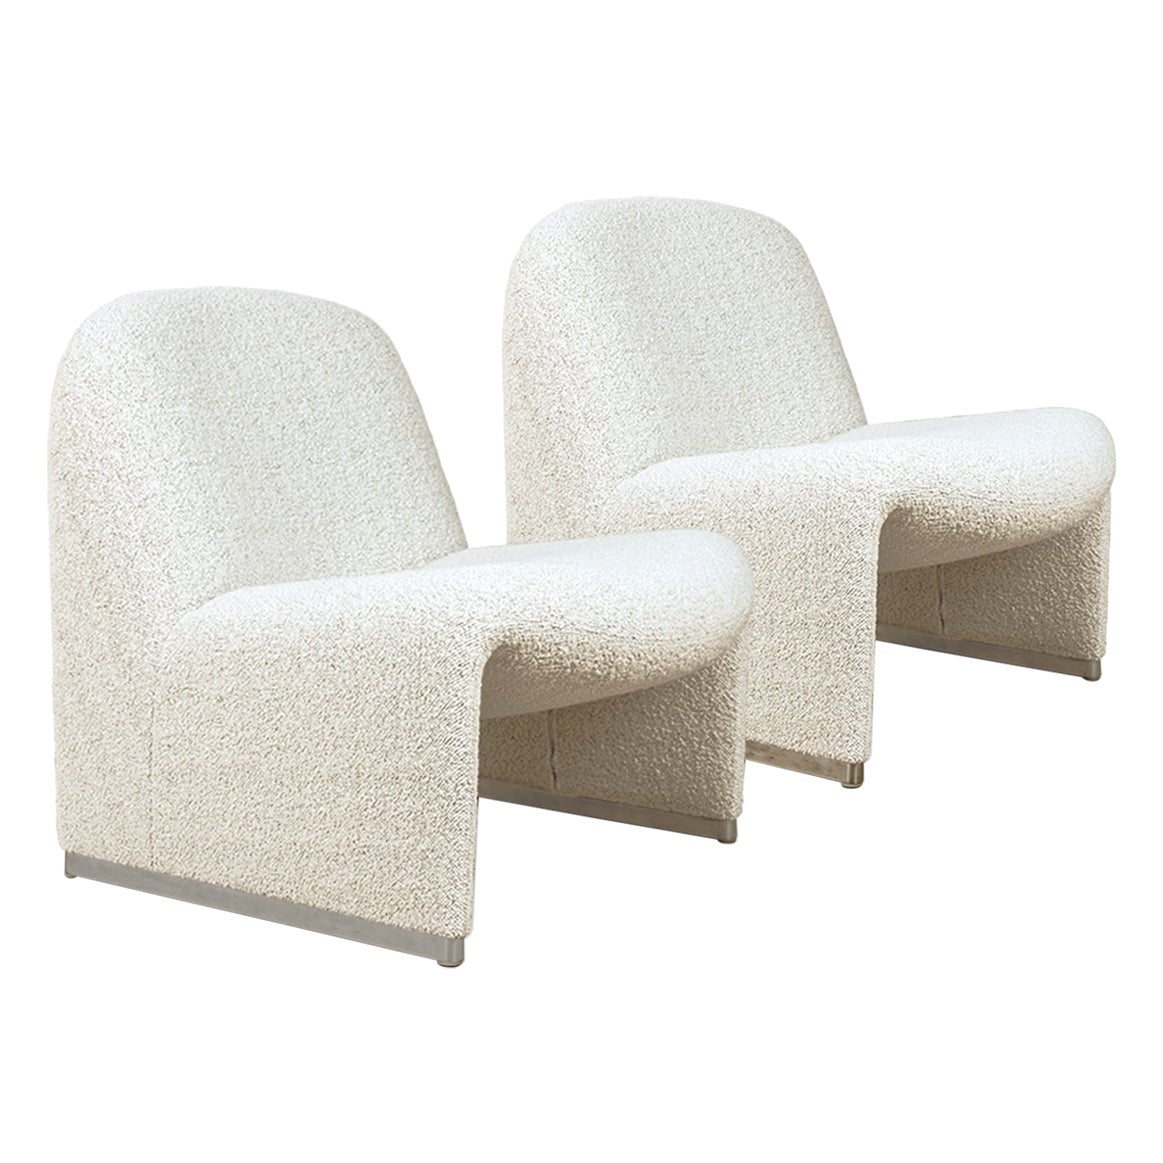 Alky Piretti Chairs, New Upholstered with Fabric Dedar, Italy